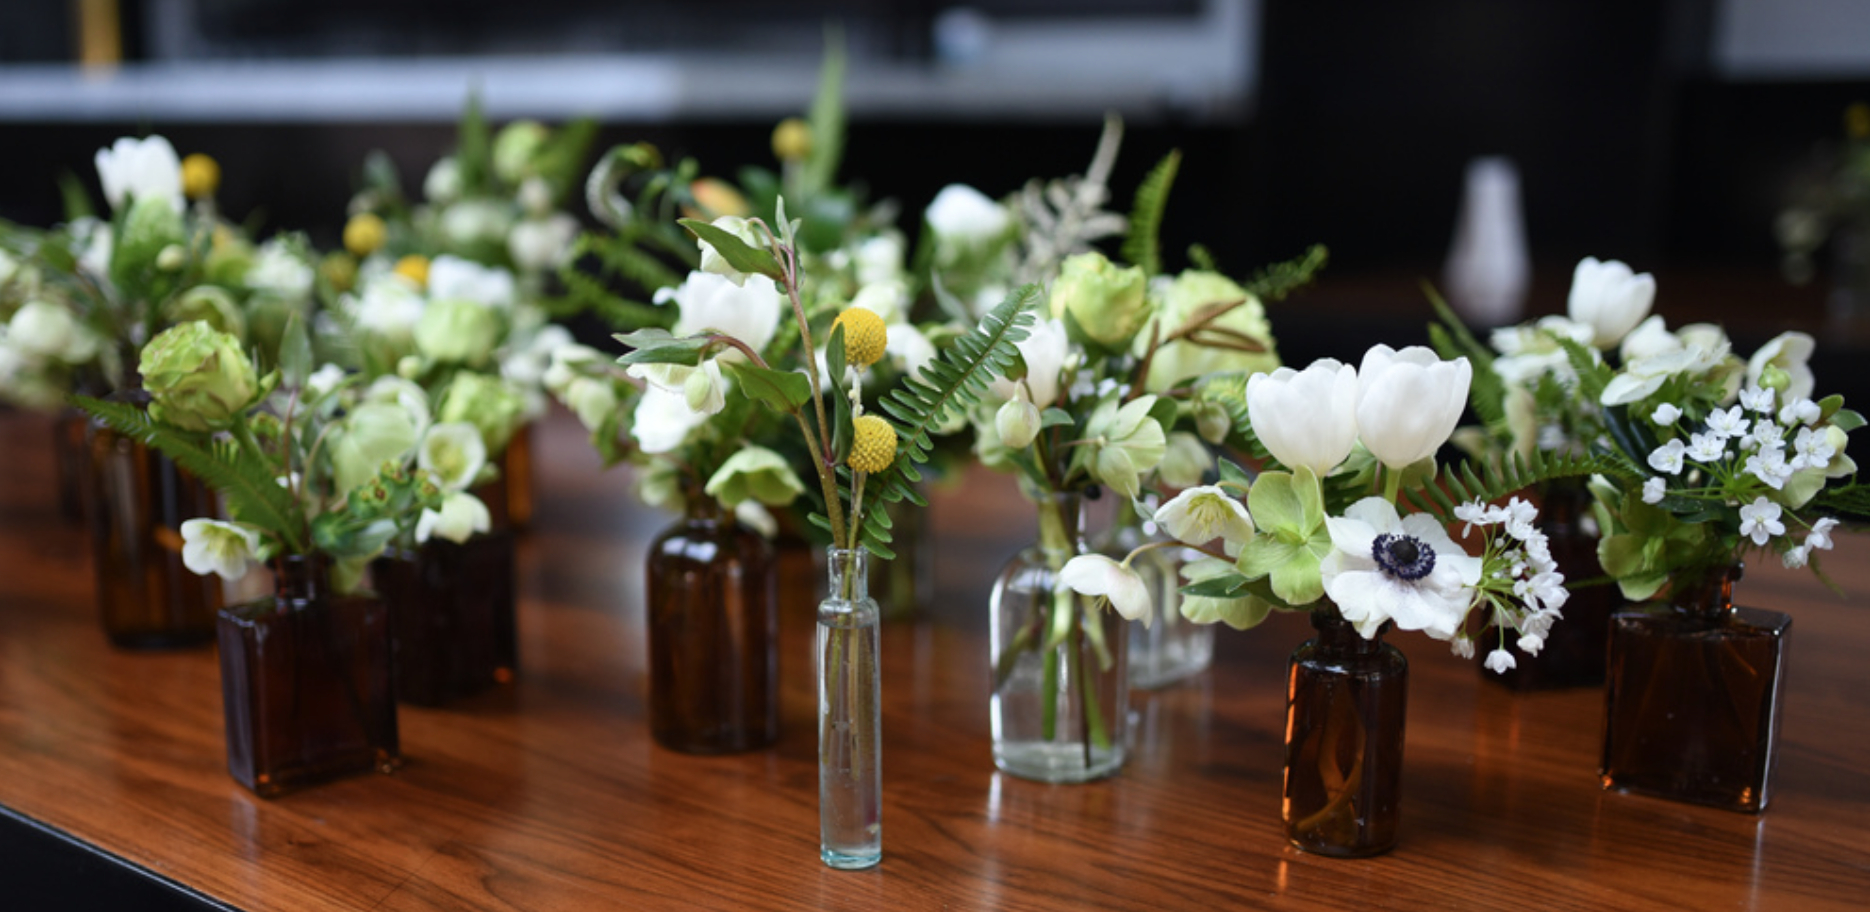 Green Building Wedding Flowers Including Mix Of Bud Vases with dimensions 1870 X 912